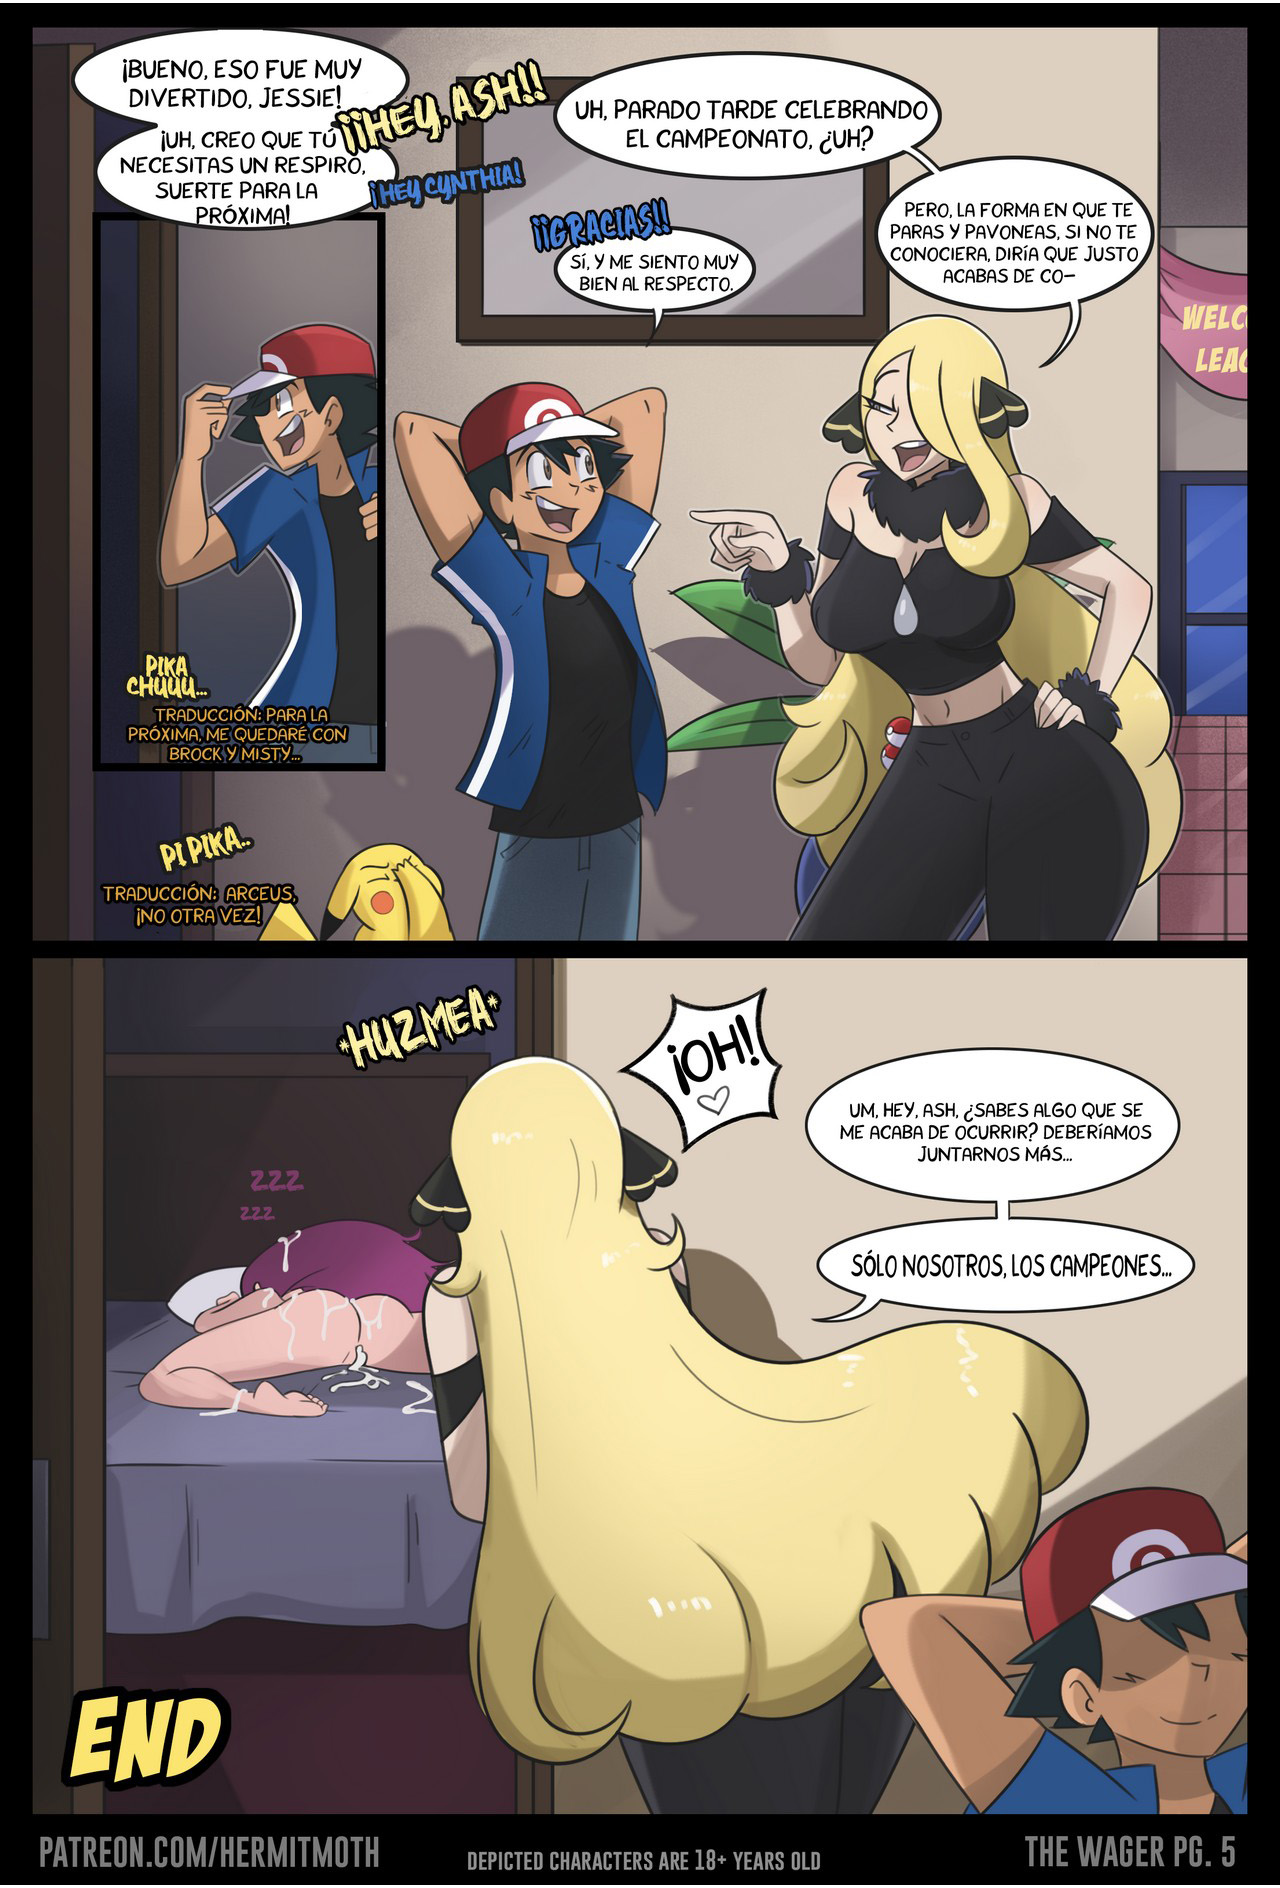 ASH and JESSIE make a Wager